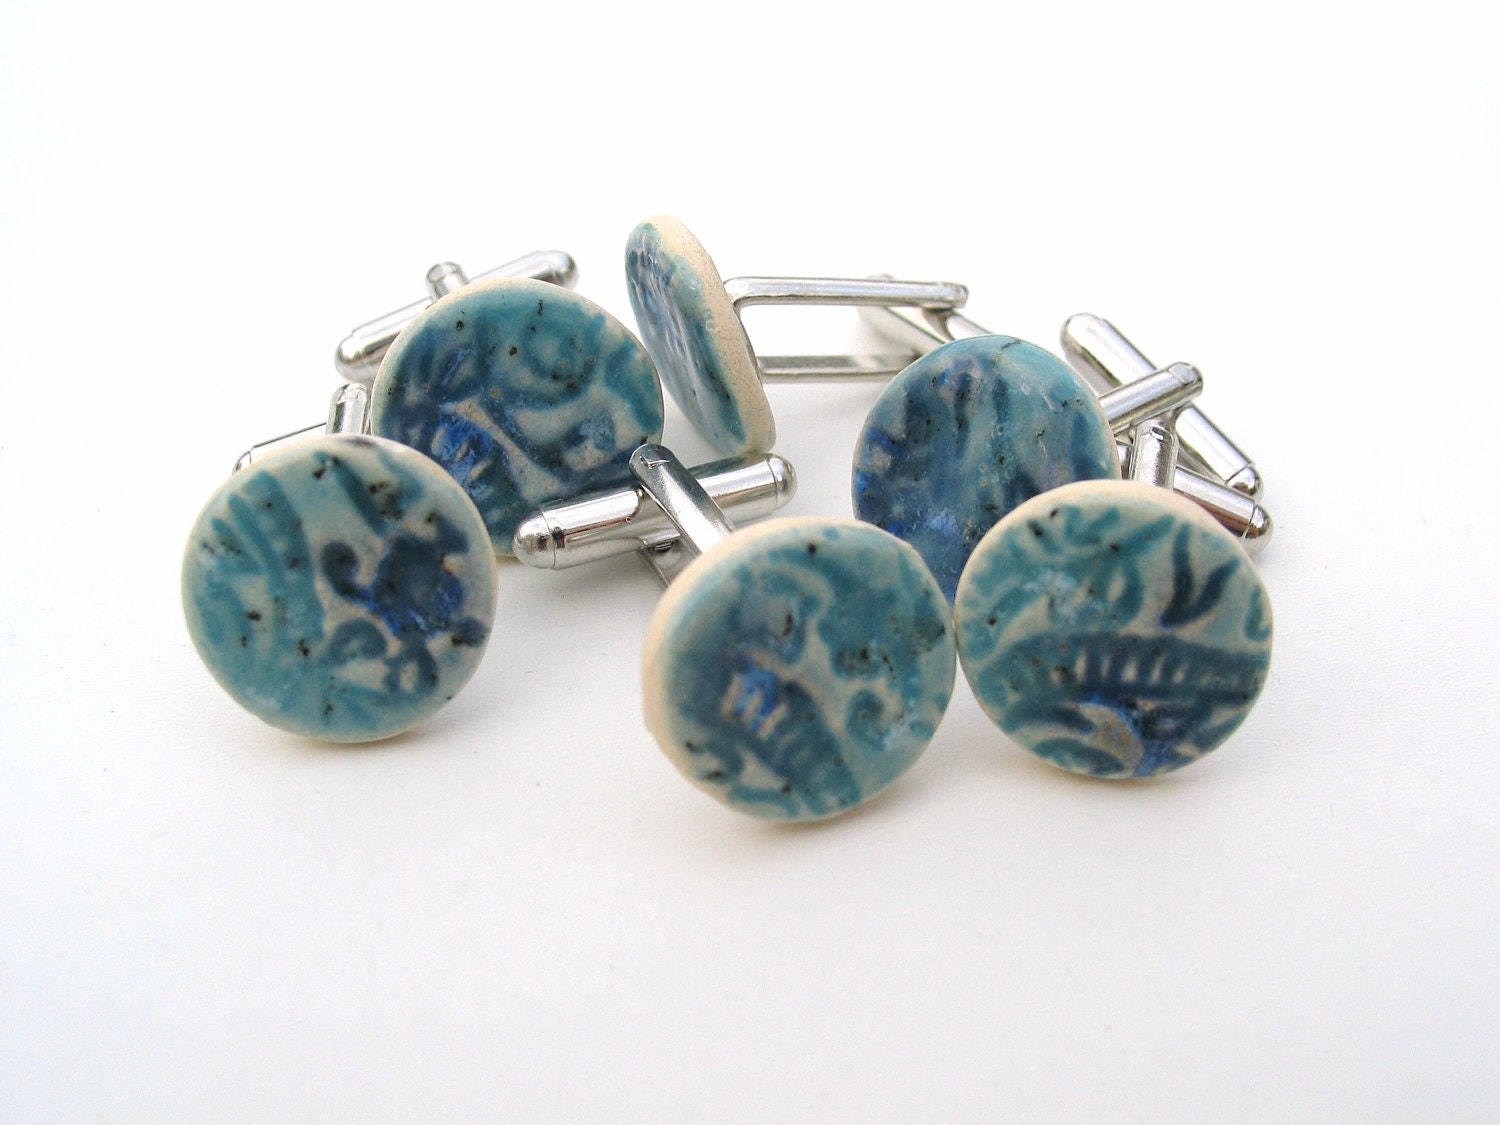 Cufflinks, blue turquoise ceramic, stamped with Indian wood block, man, men, unique - damsontreepottery